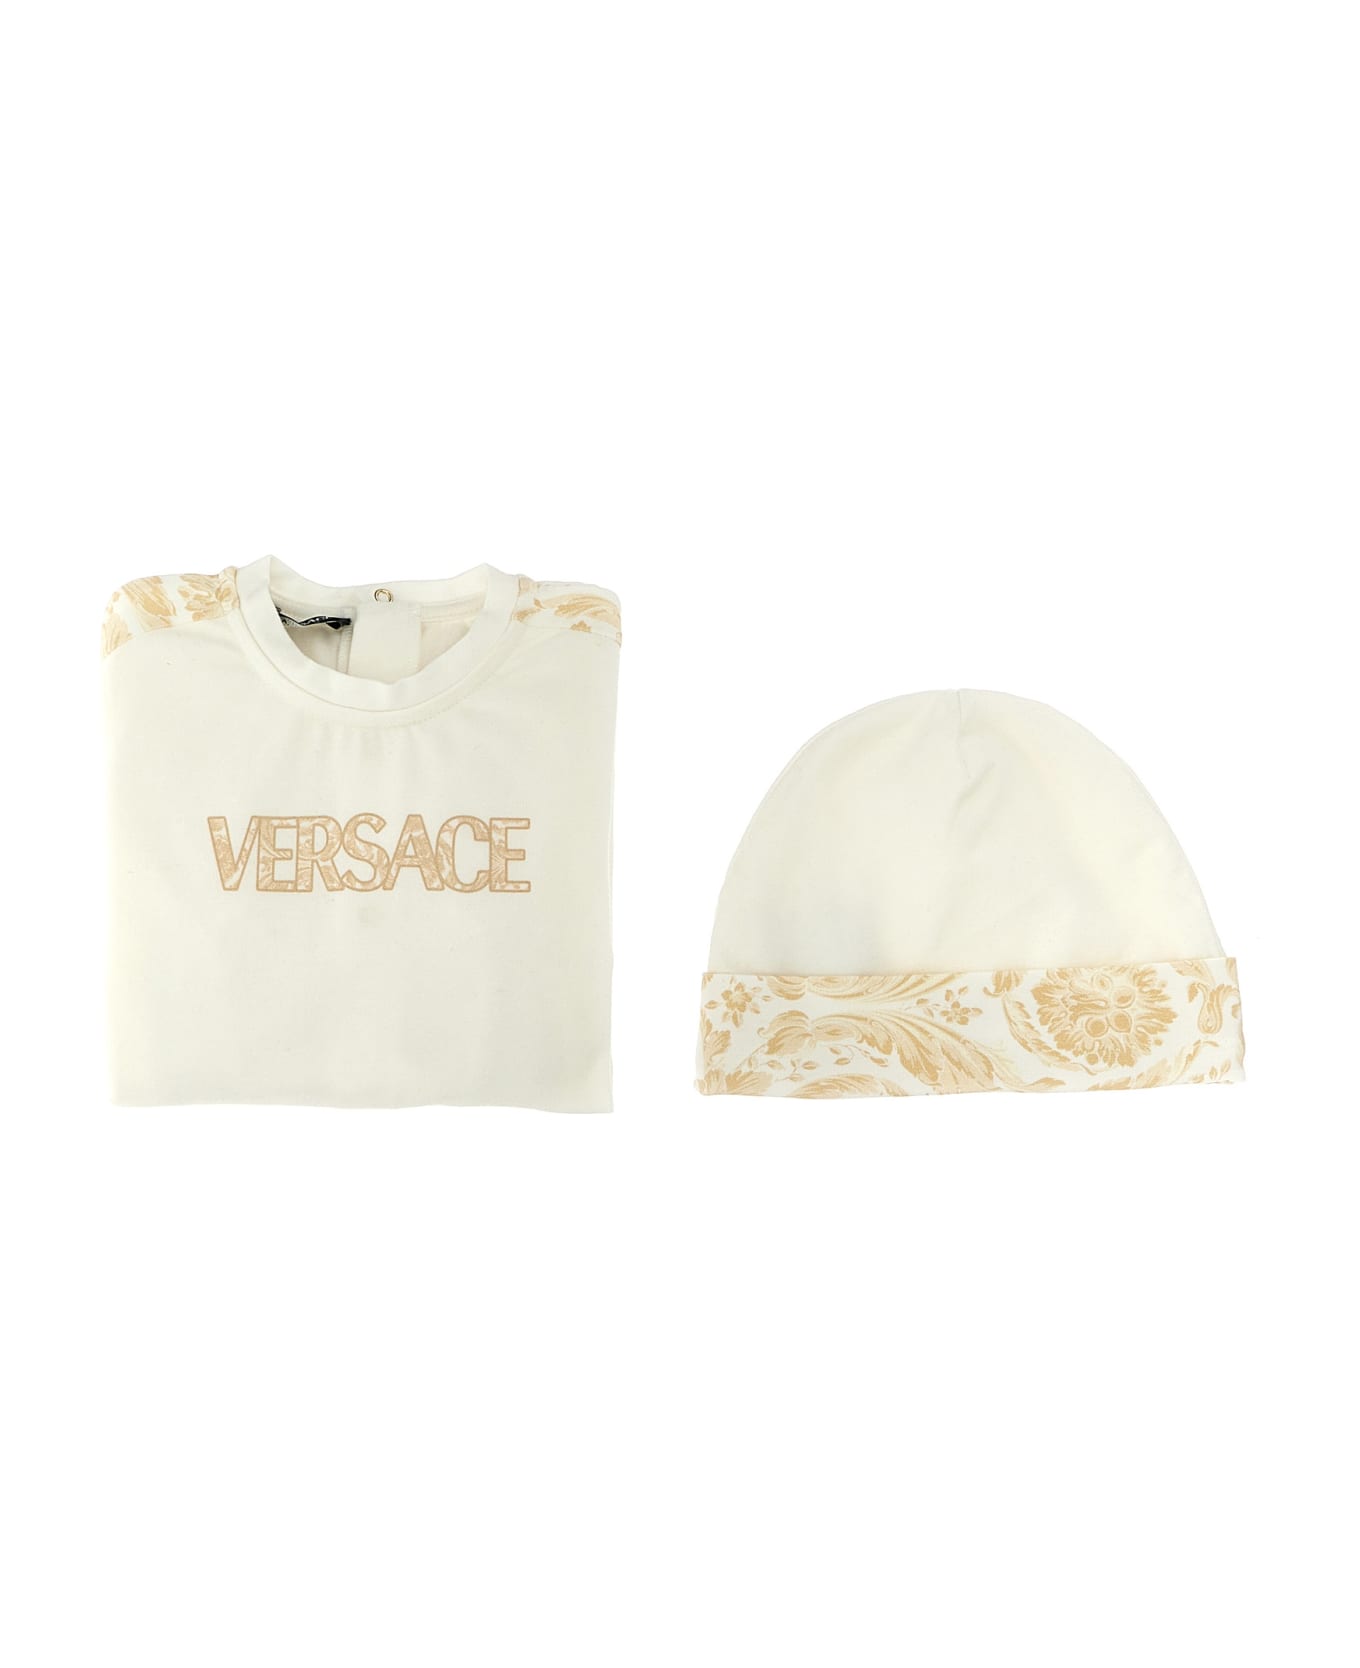 Versace 'barocco' Sleepsuit And Beanie Baby Set - White